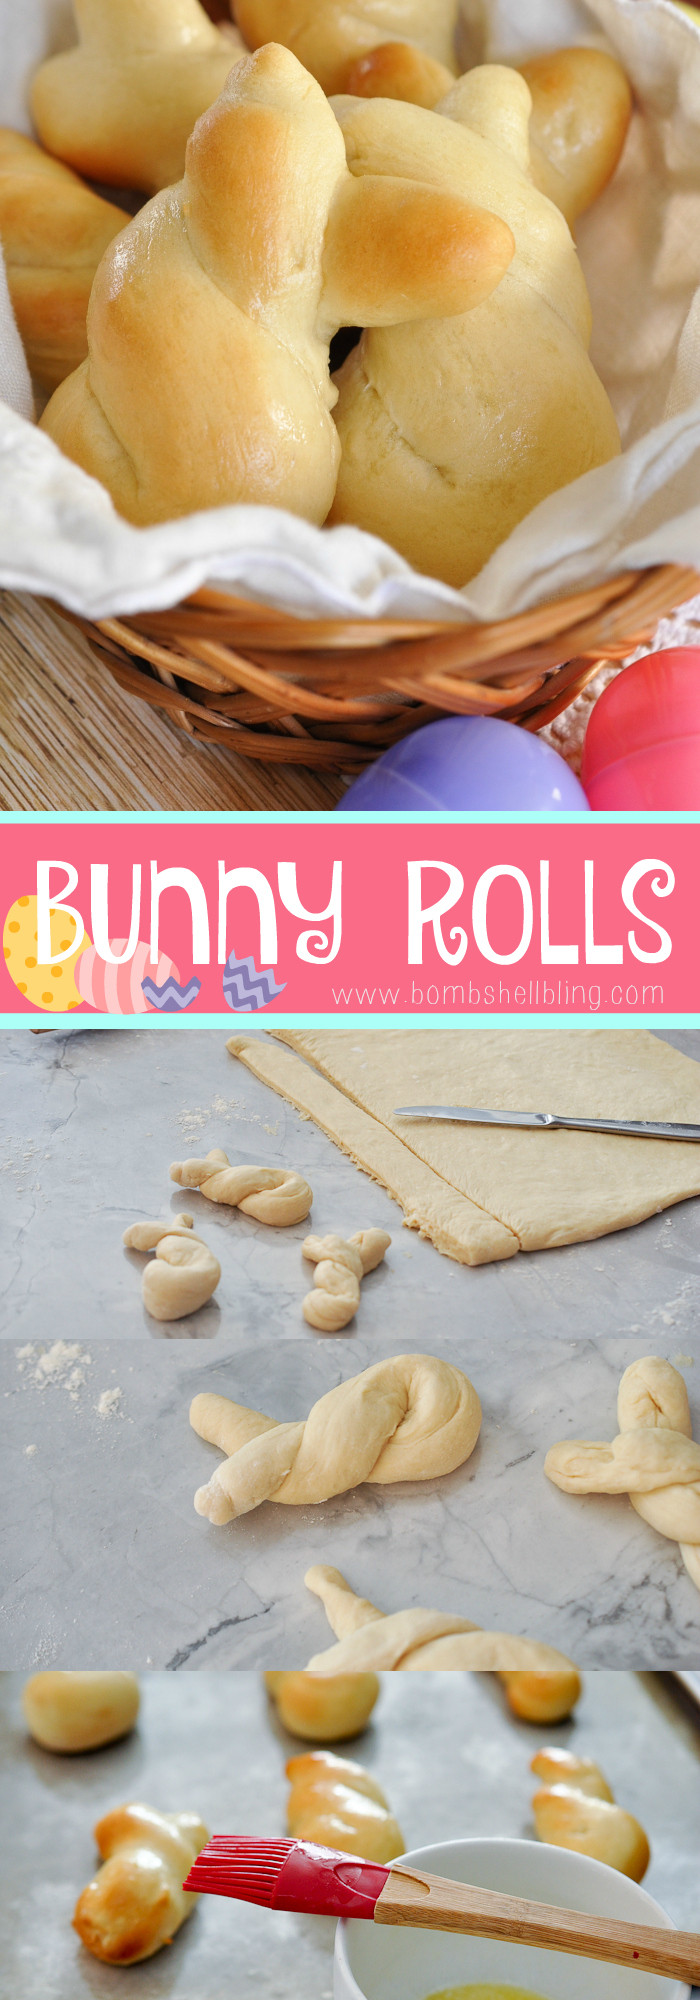 Easter Dinner Rolls
 Easter Bunny Rolls Recipe a Festive Addition to Your